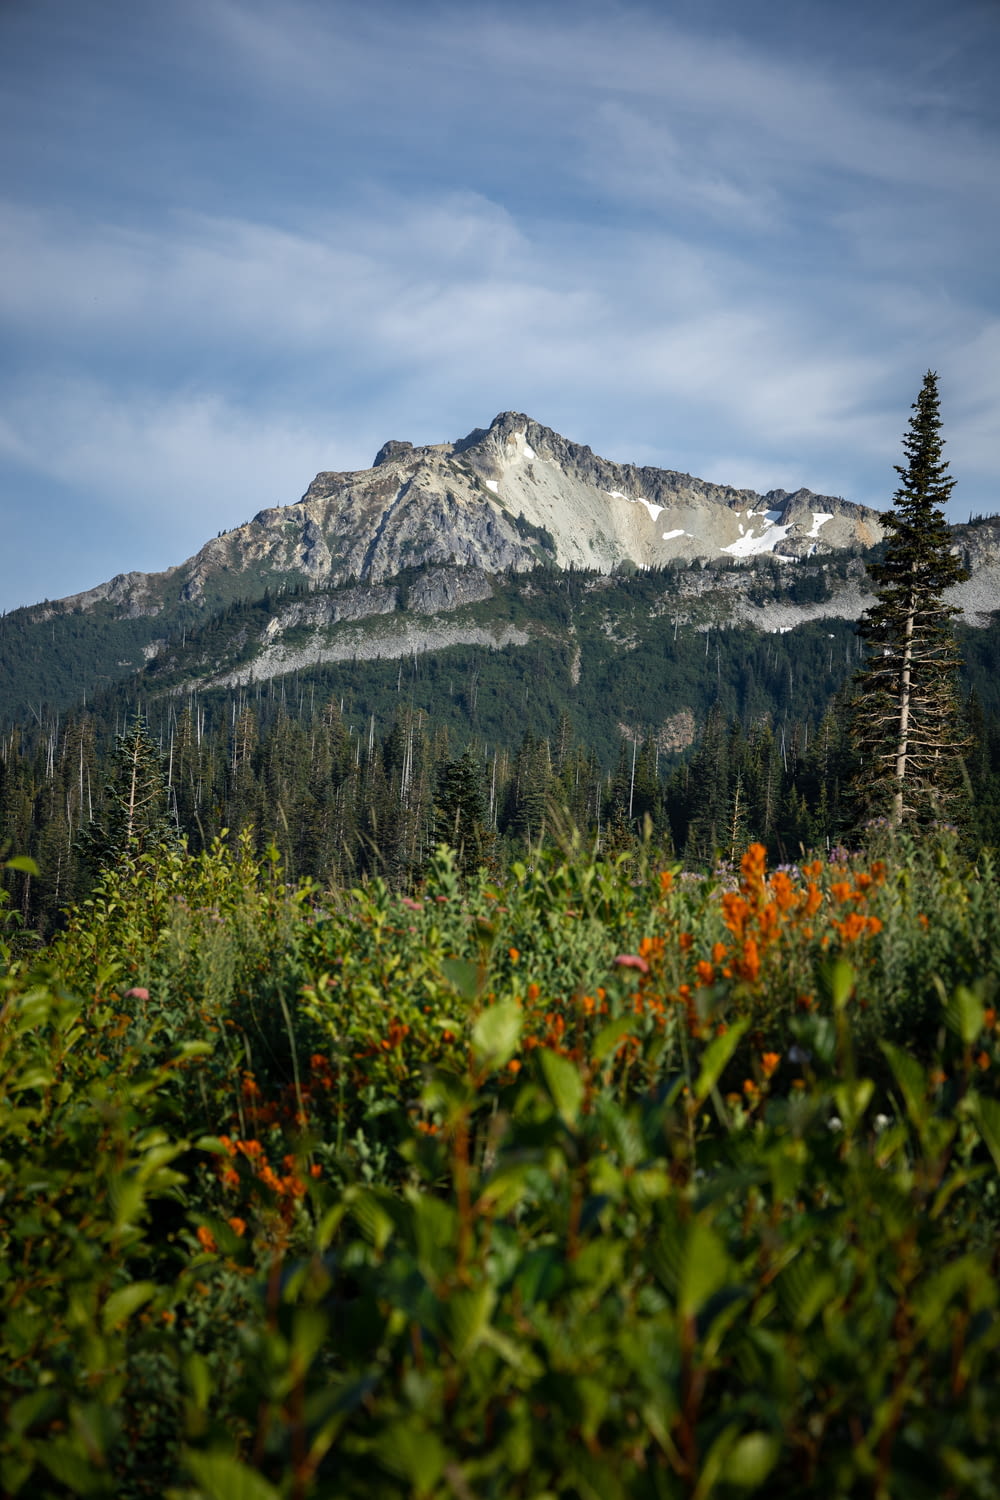 a view of a mountain with trees and flowers in the foreground